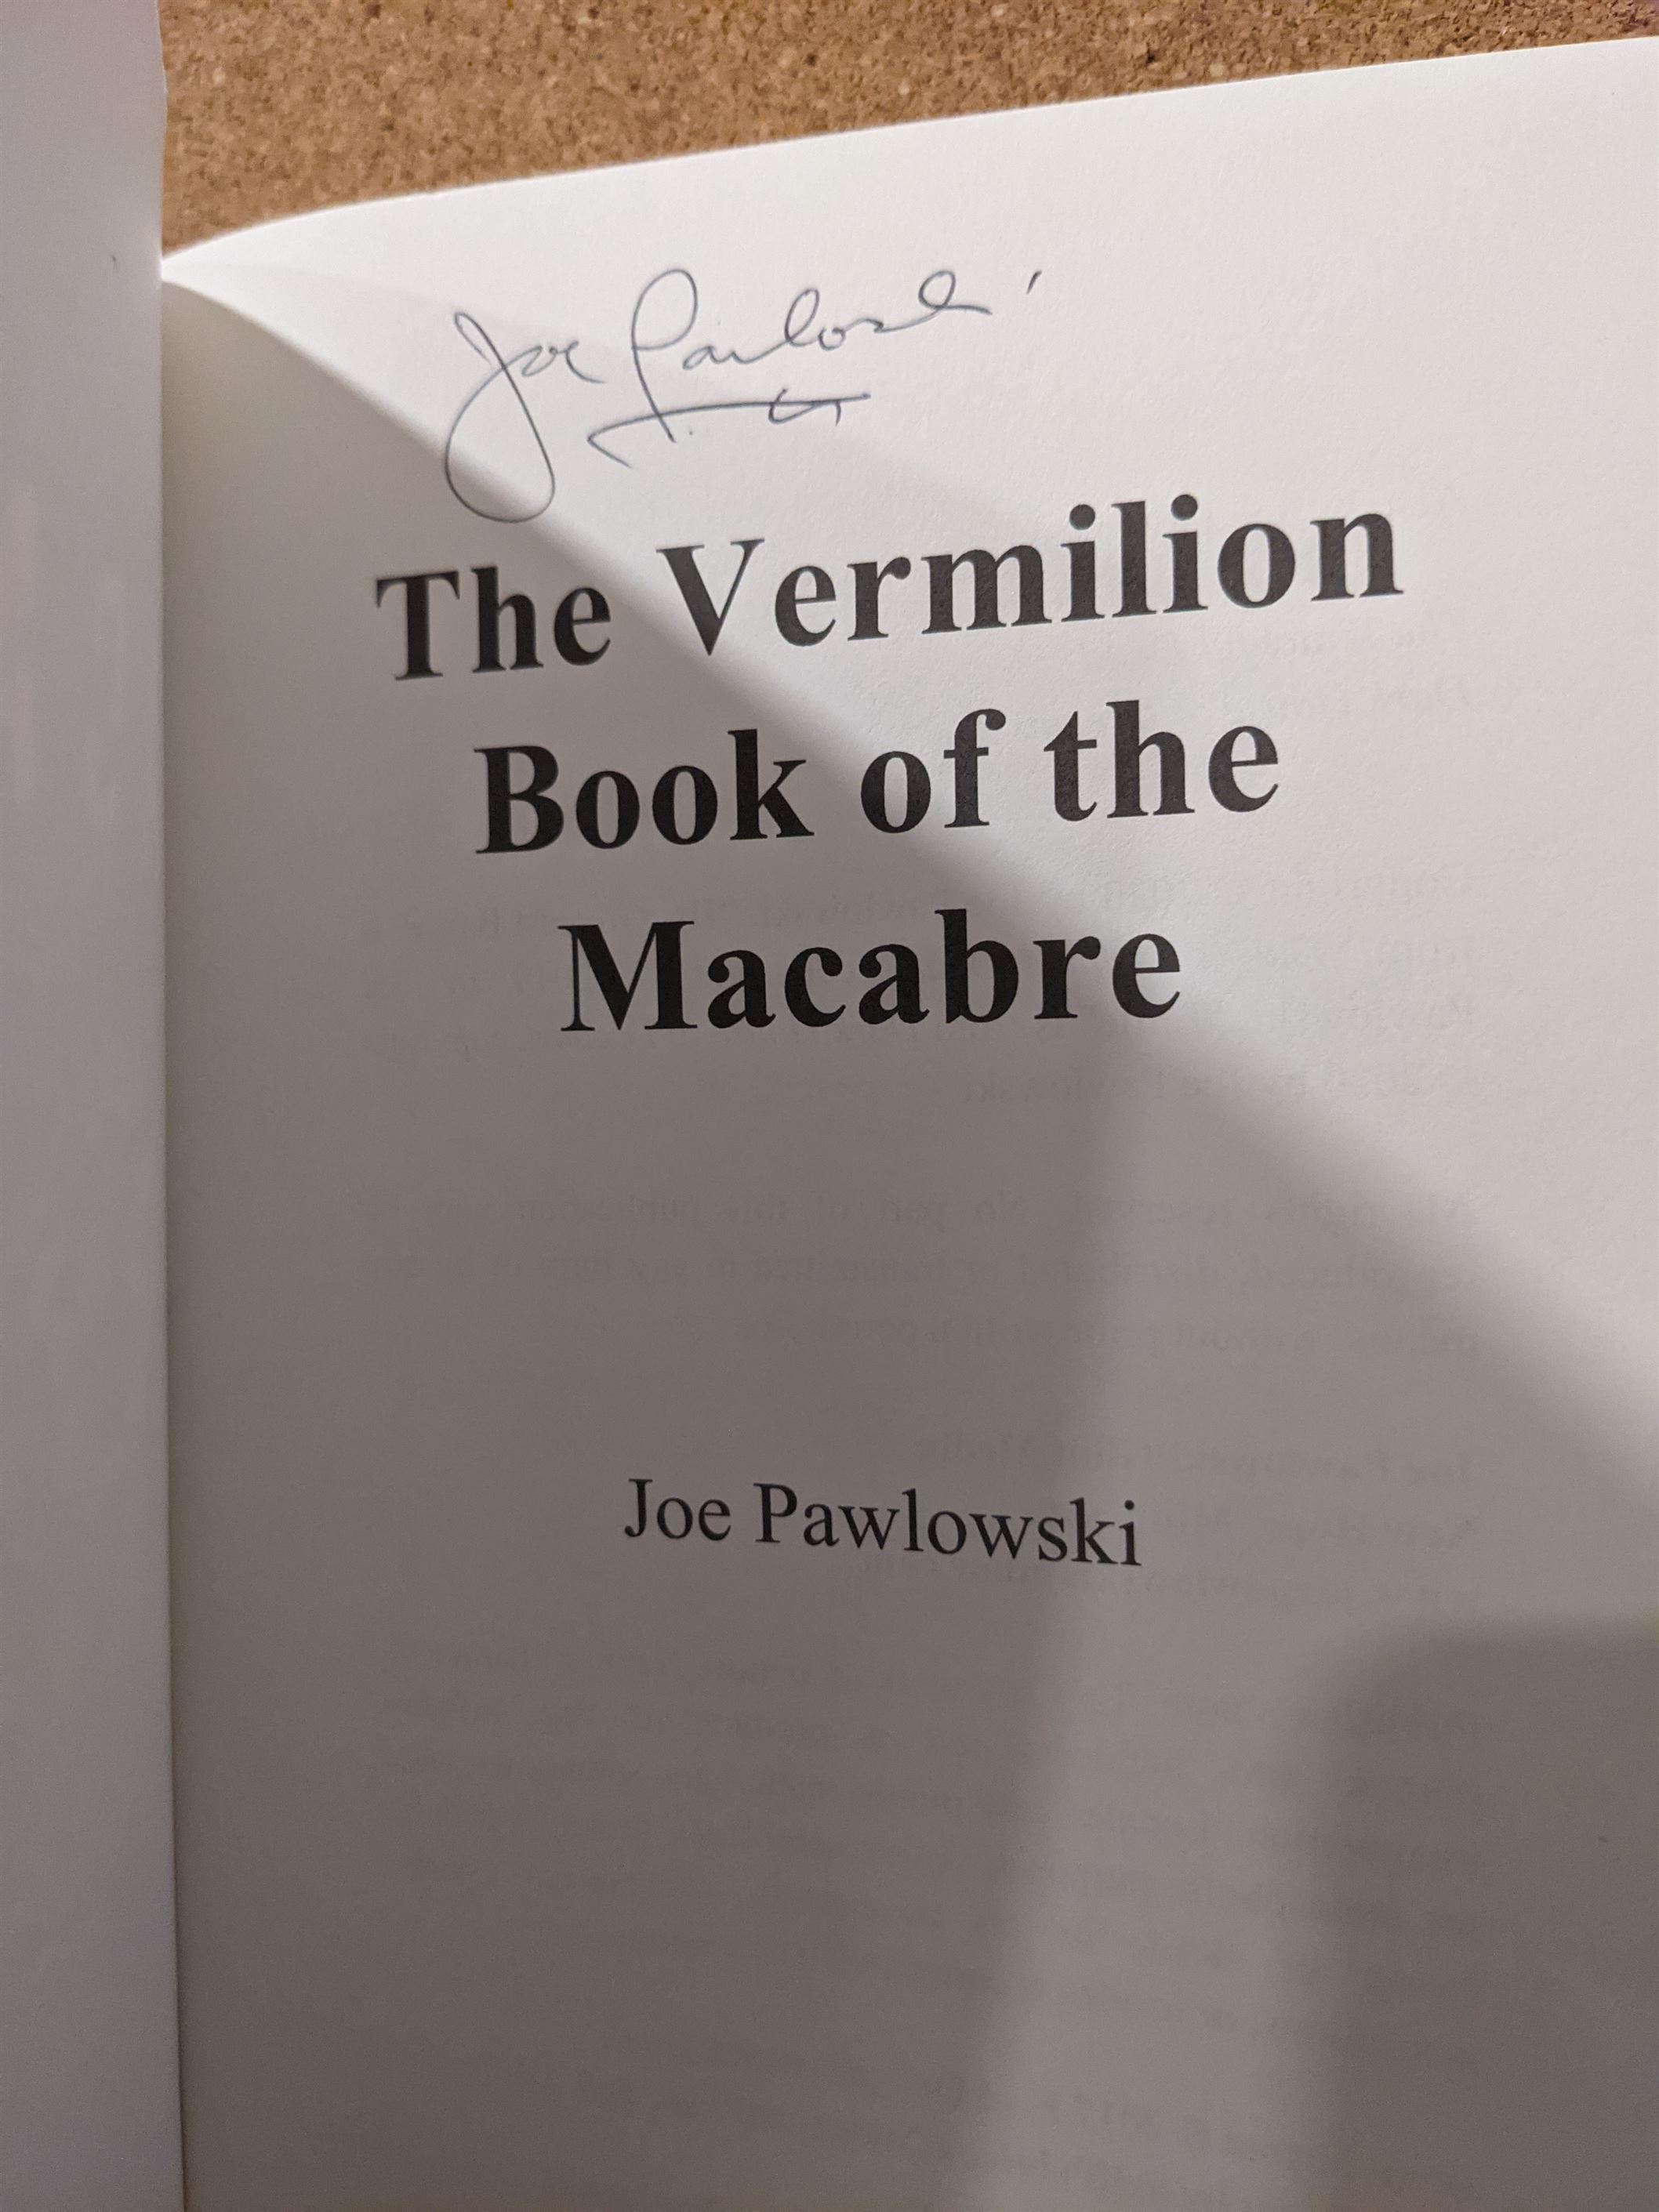 Pawlowski even signed the book for me! Casey Masterson | The Montclarion